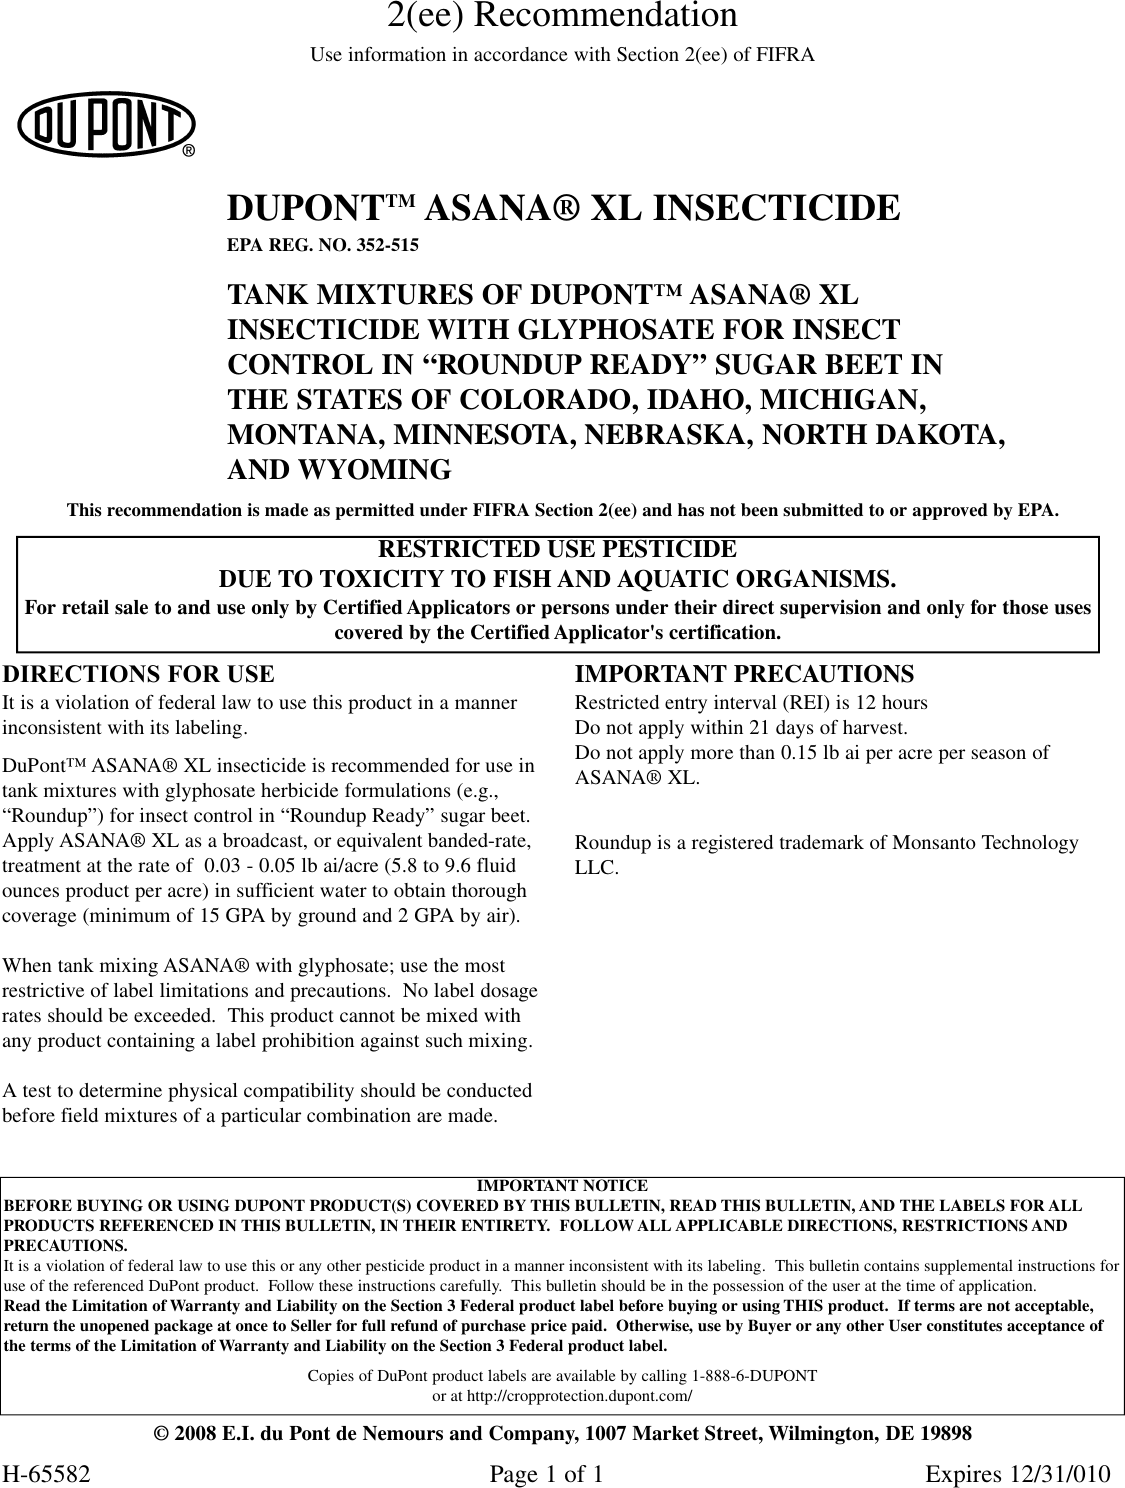 Page 1 of 2 - Dupont-Authentication Dupont-Authentication-Xl-Insecticide-Users-Manual- DUPONT ASANA XL  Dupont-authentication-xl-insecticide-users-manual